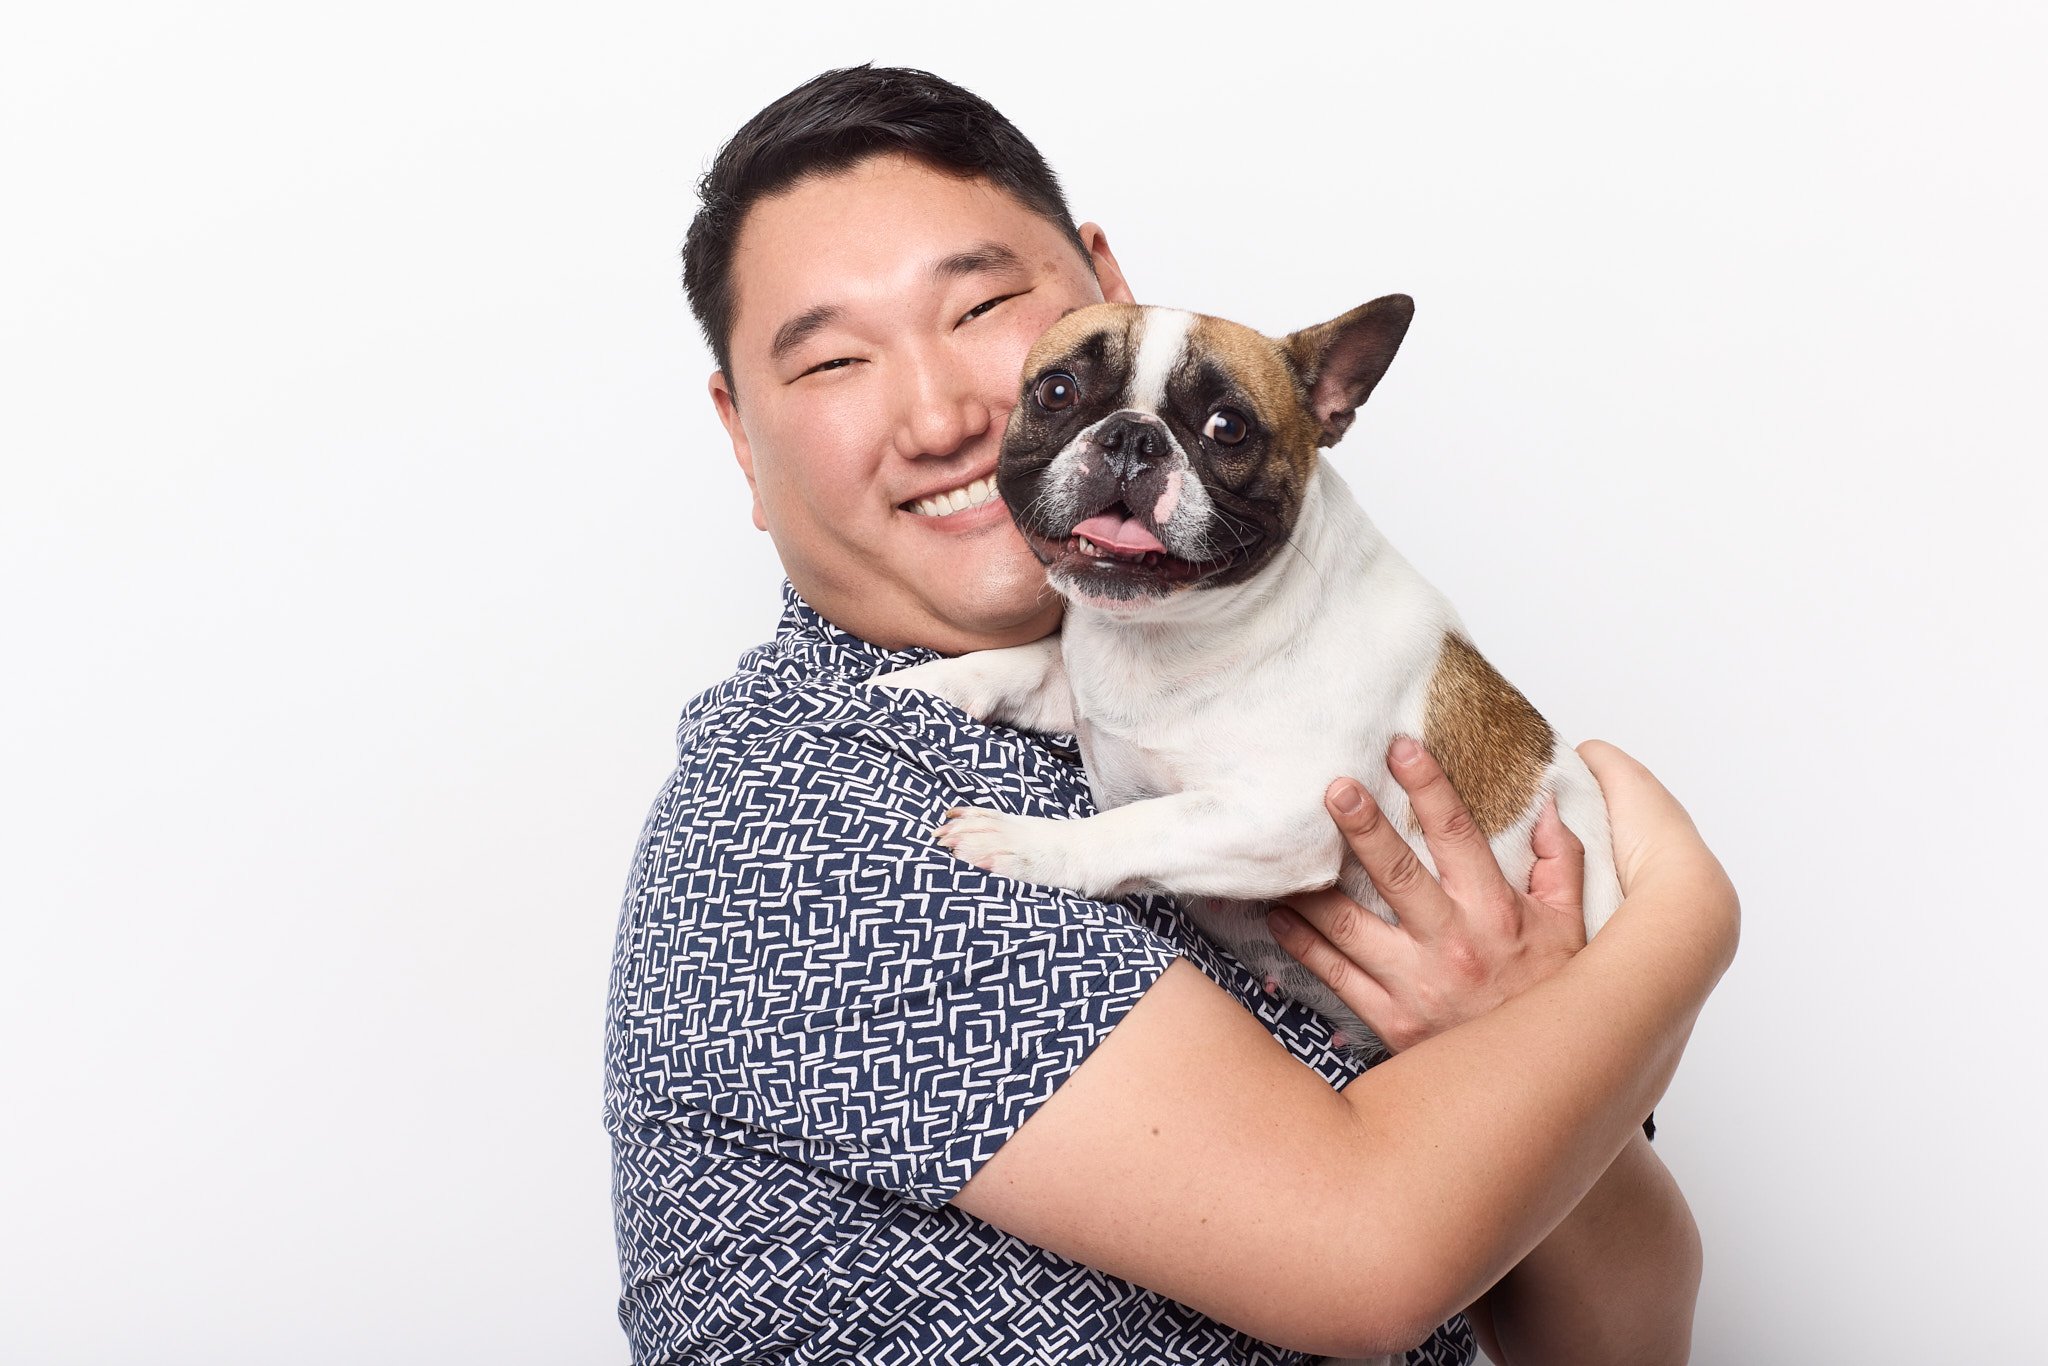 man poses with his dog for christmas photos